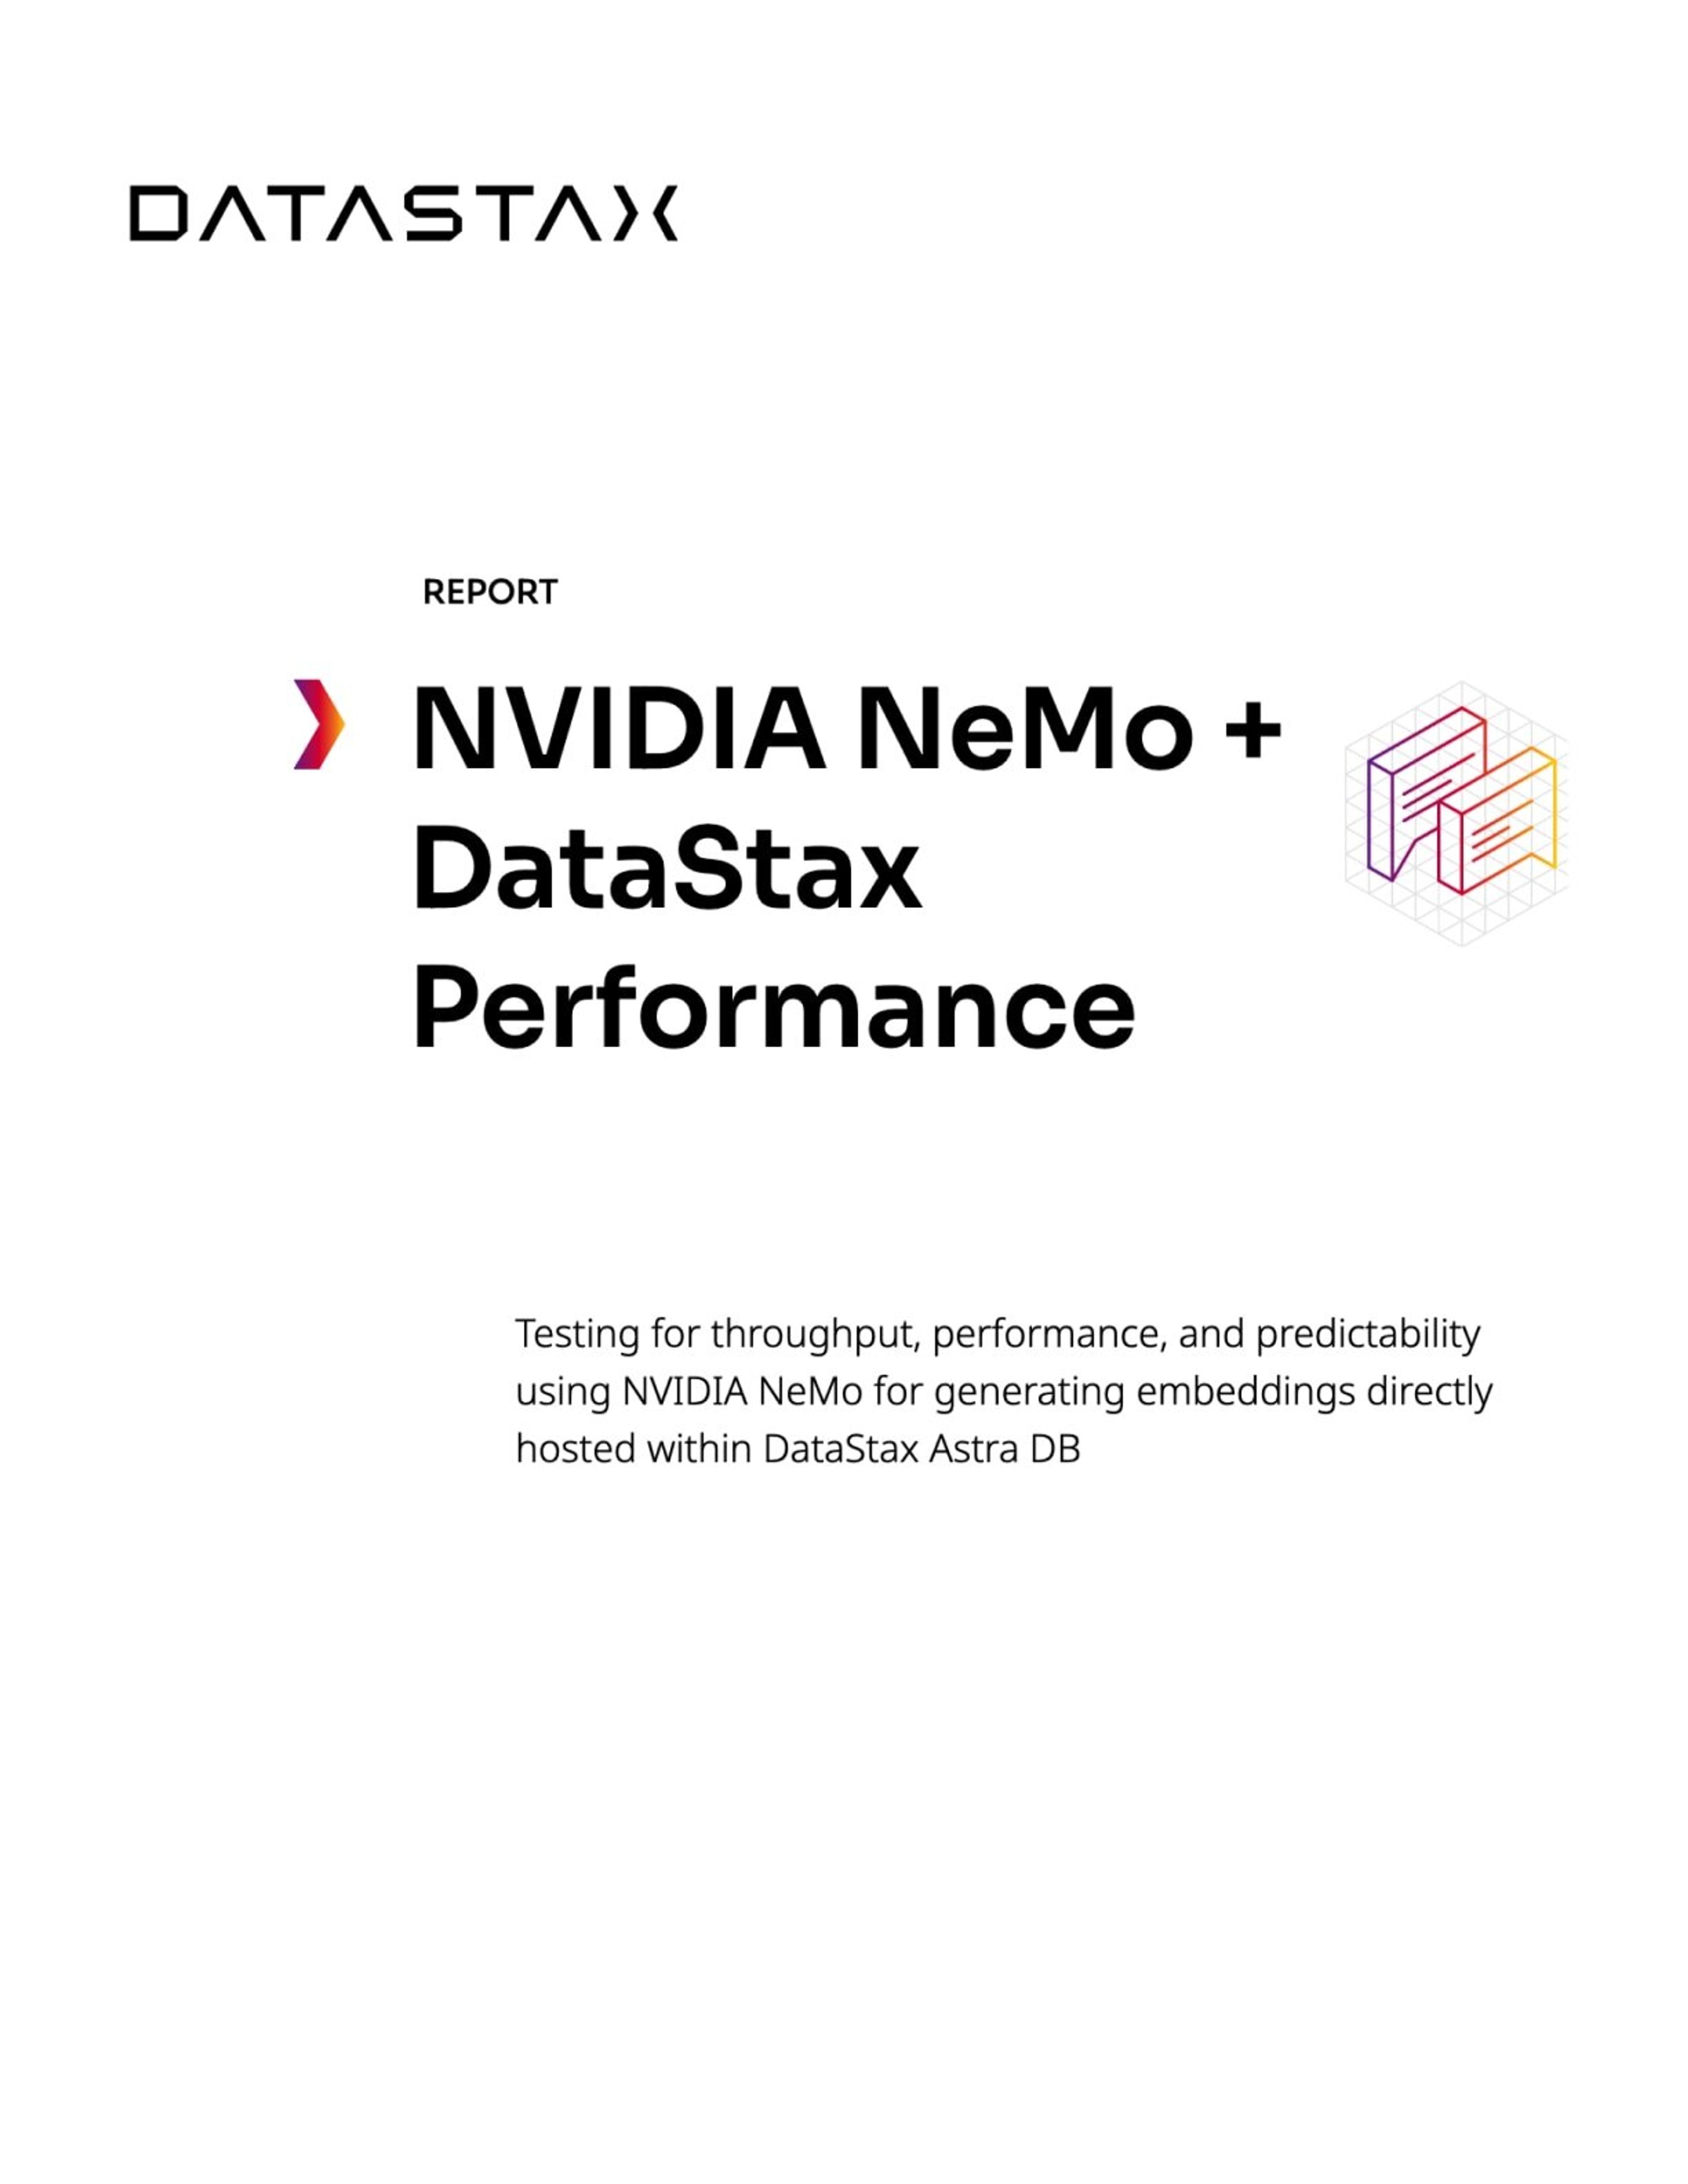 NVIDIA NeMo Hosted in Astra DB Performance Study